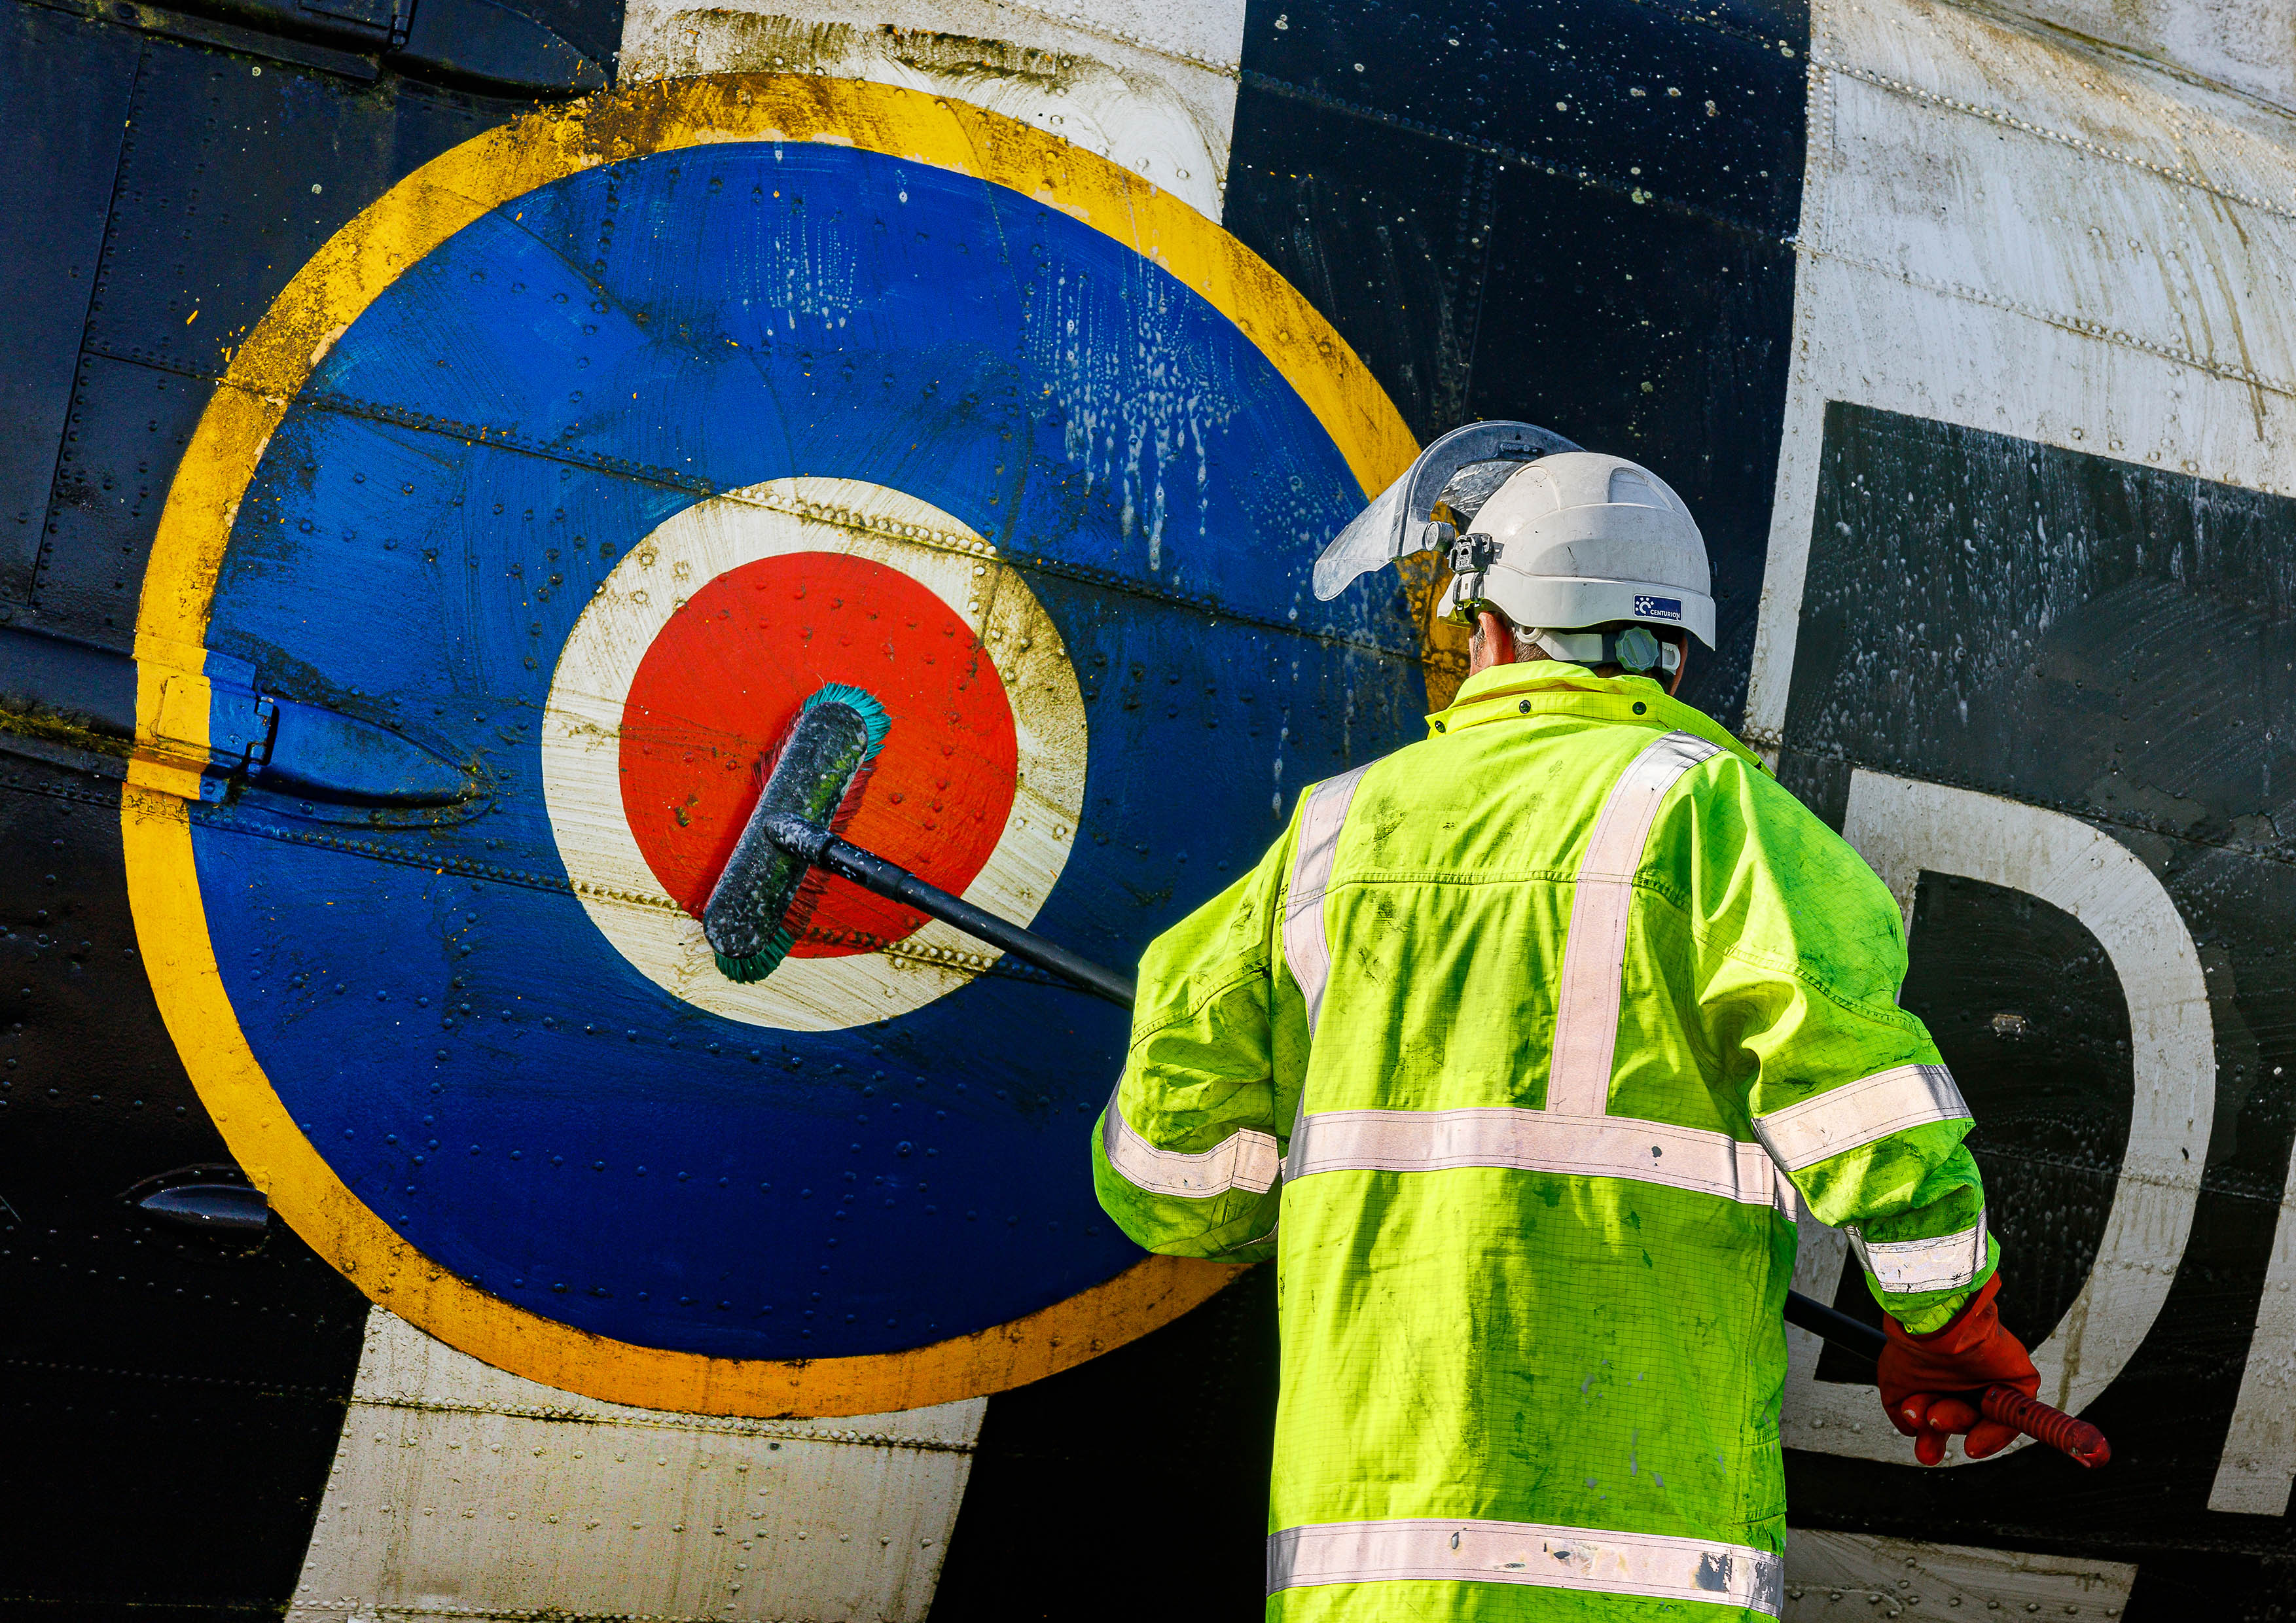 Photo: A member of the Serco Aircraft Wash Team brushing organic debris from the RAF roundel aft of the cargo door